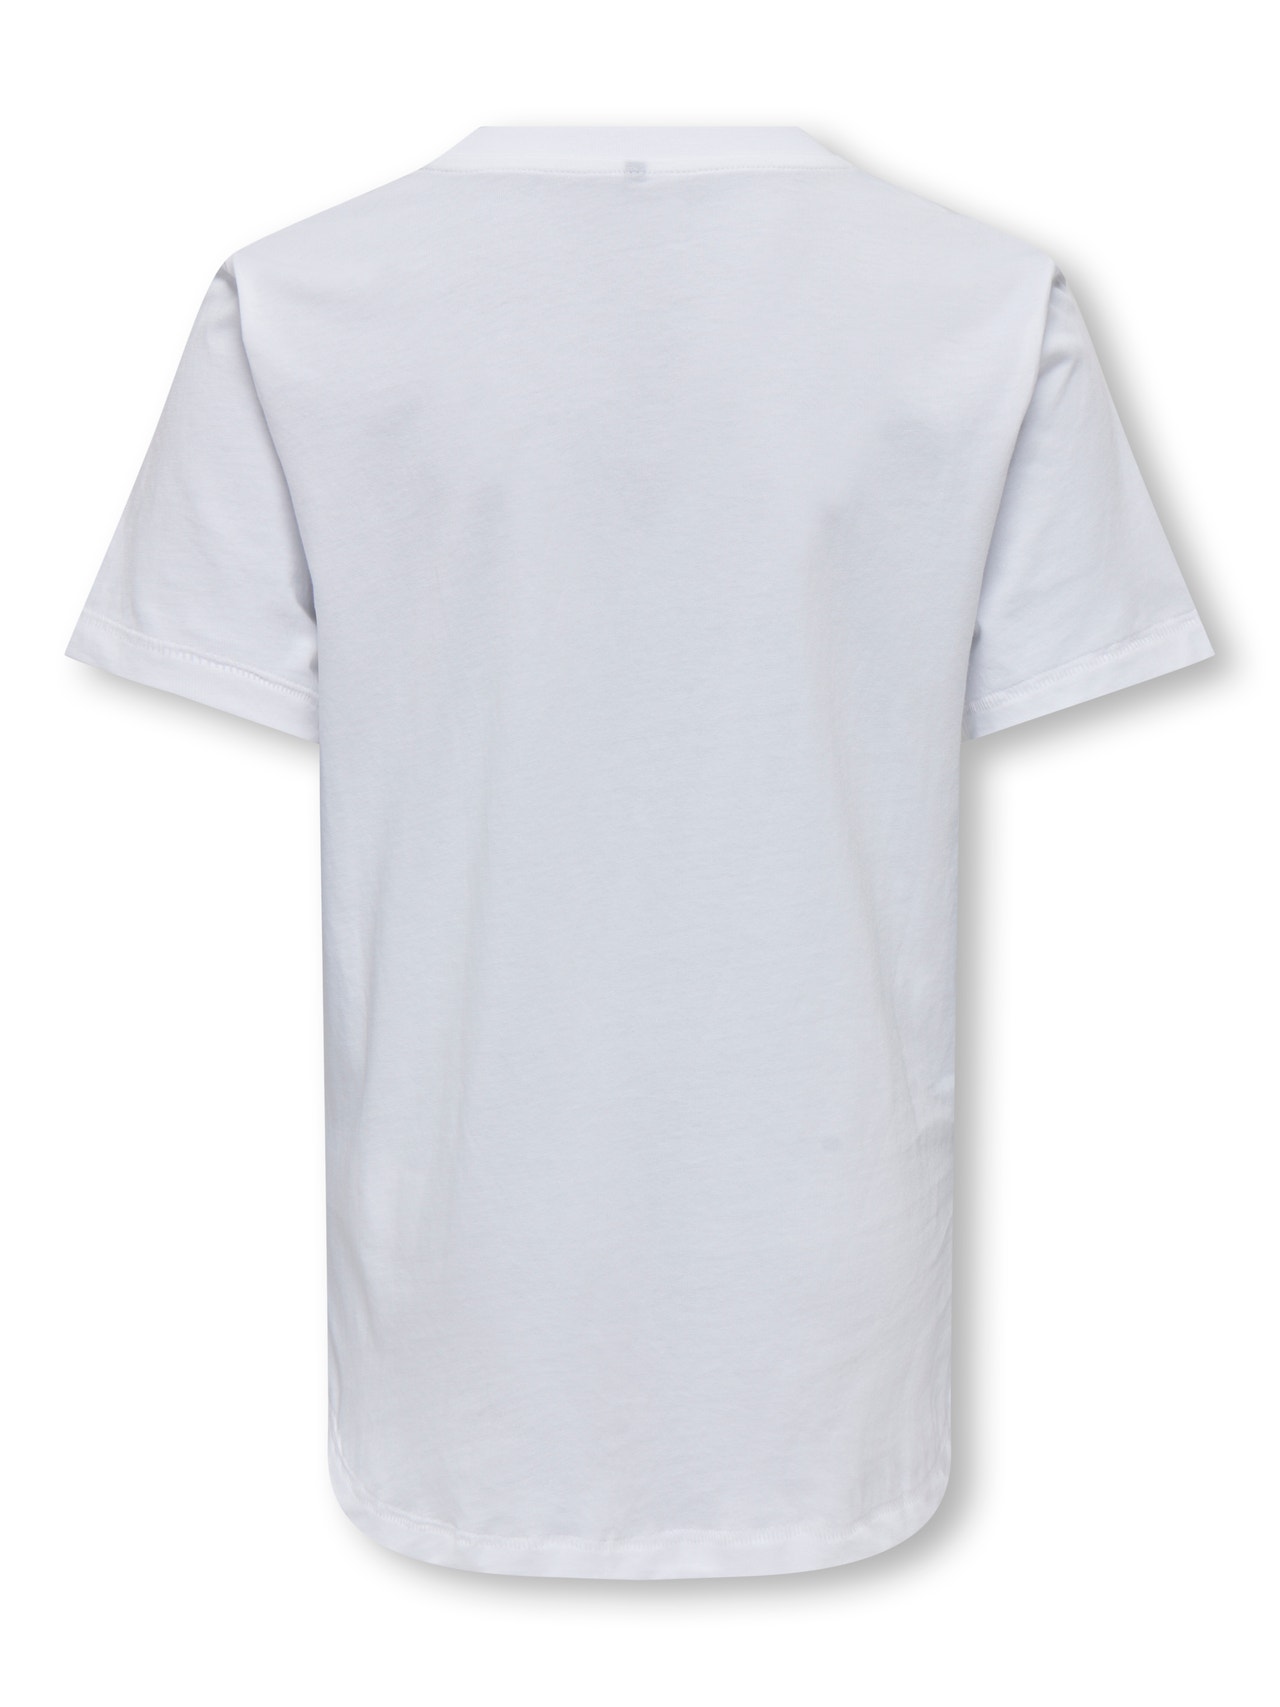 ONLY o-neck t-shirt -Bright White - 15297705